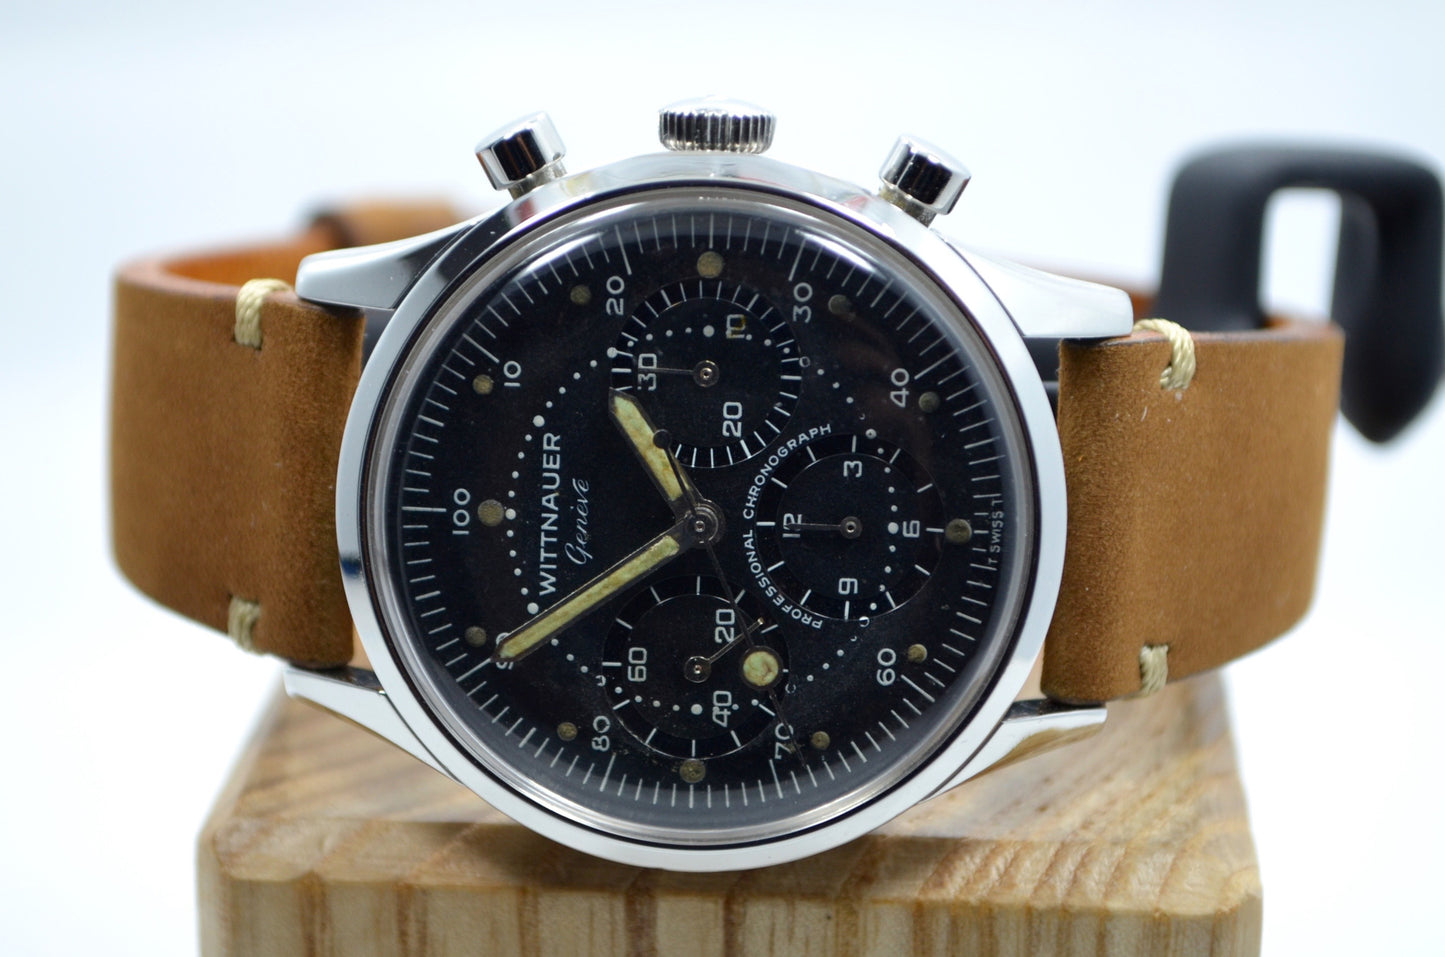 Vintage Wittnauer Professional Chronograph Steel Valjoux 72 Manual Wristwatch - Hashtag Watch Company